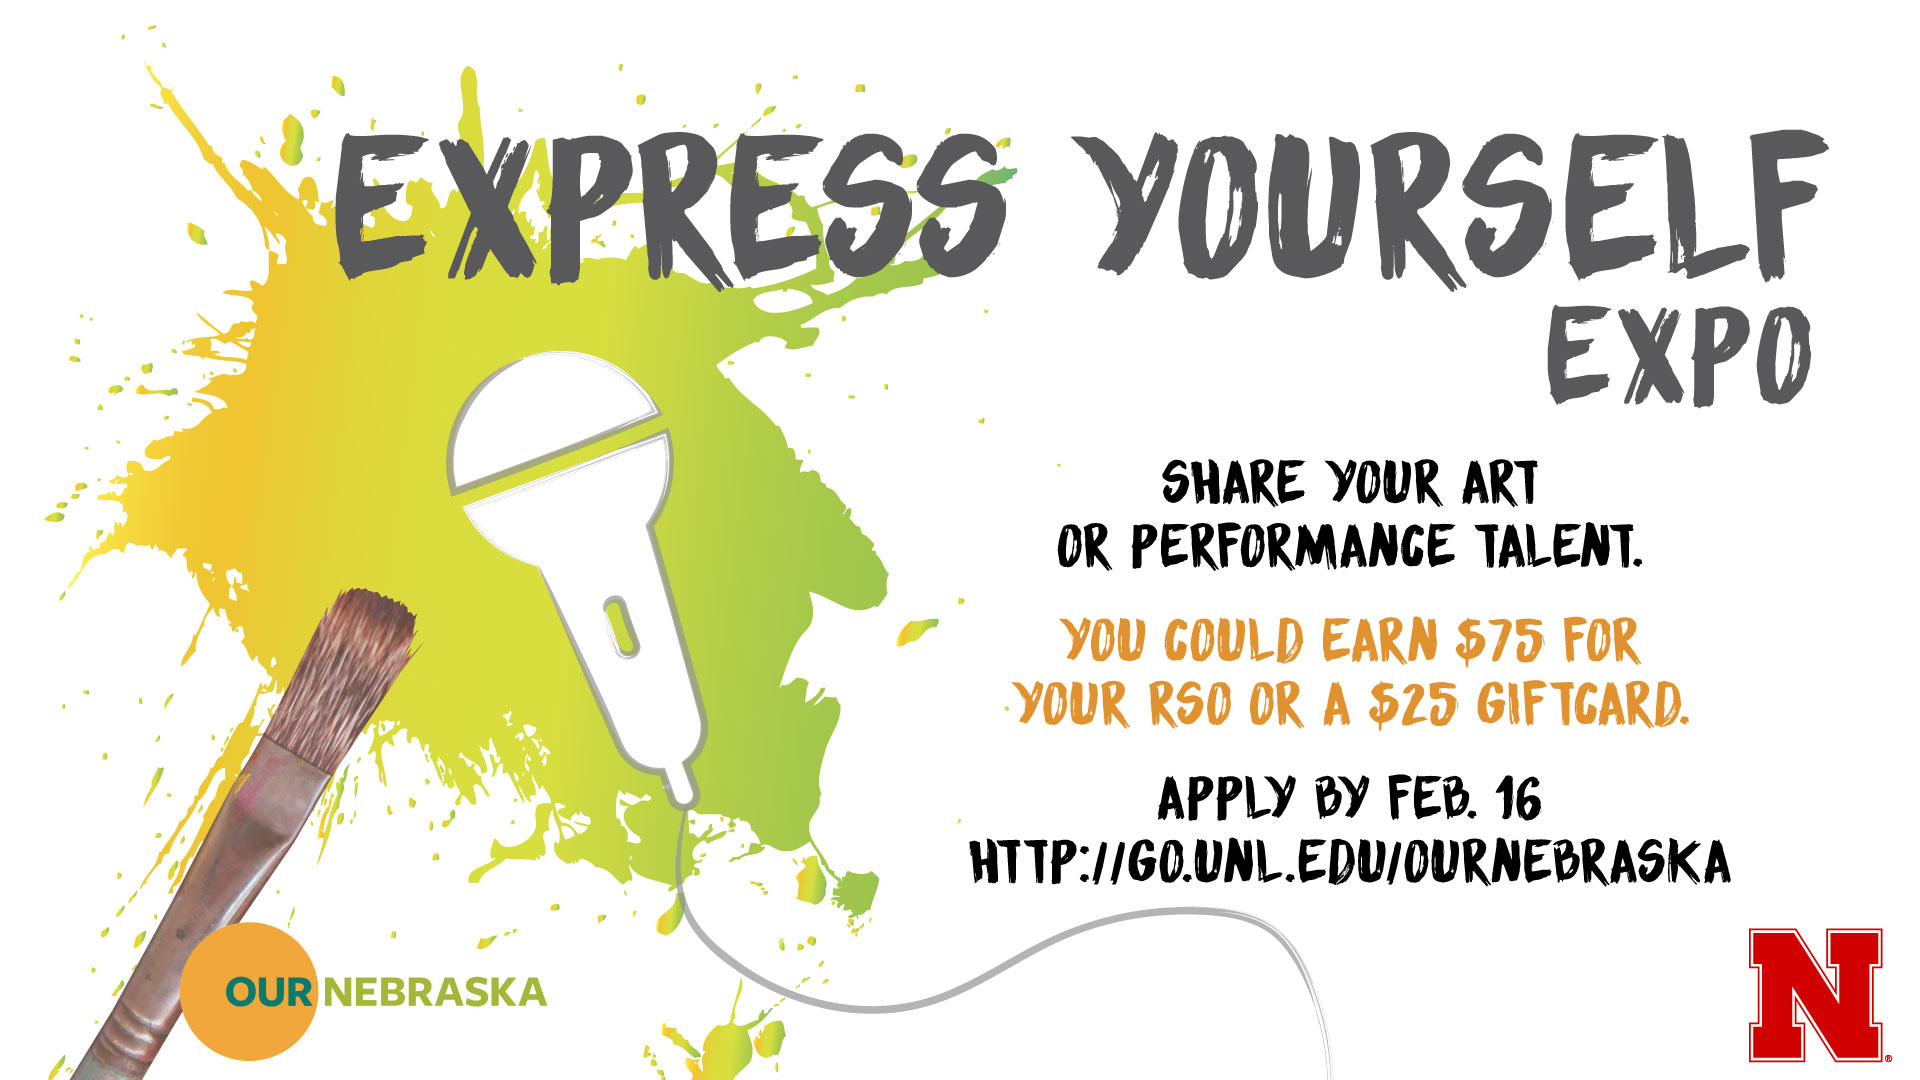 Express Yourself Expo poster